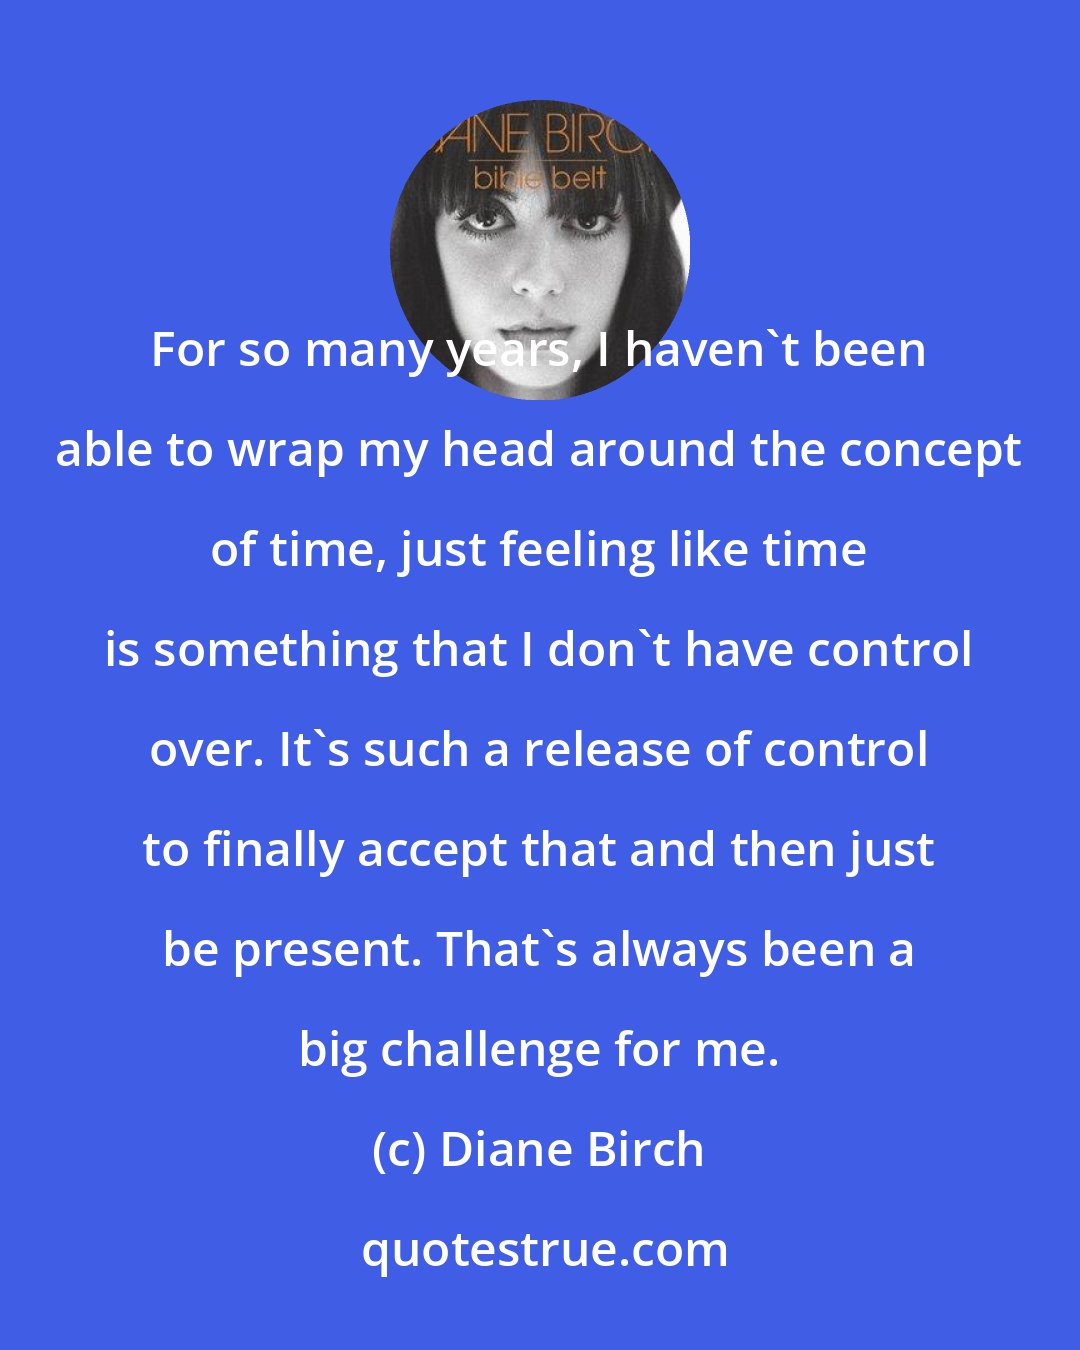 Diane Birch: For so many years, I haven't been able to wrap my head around the concept of time, just feeling like time is something that I don't have control over. It's such a release of control to finally accept that and then just be present. That's always been a big challenge for me.